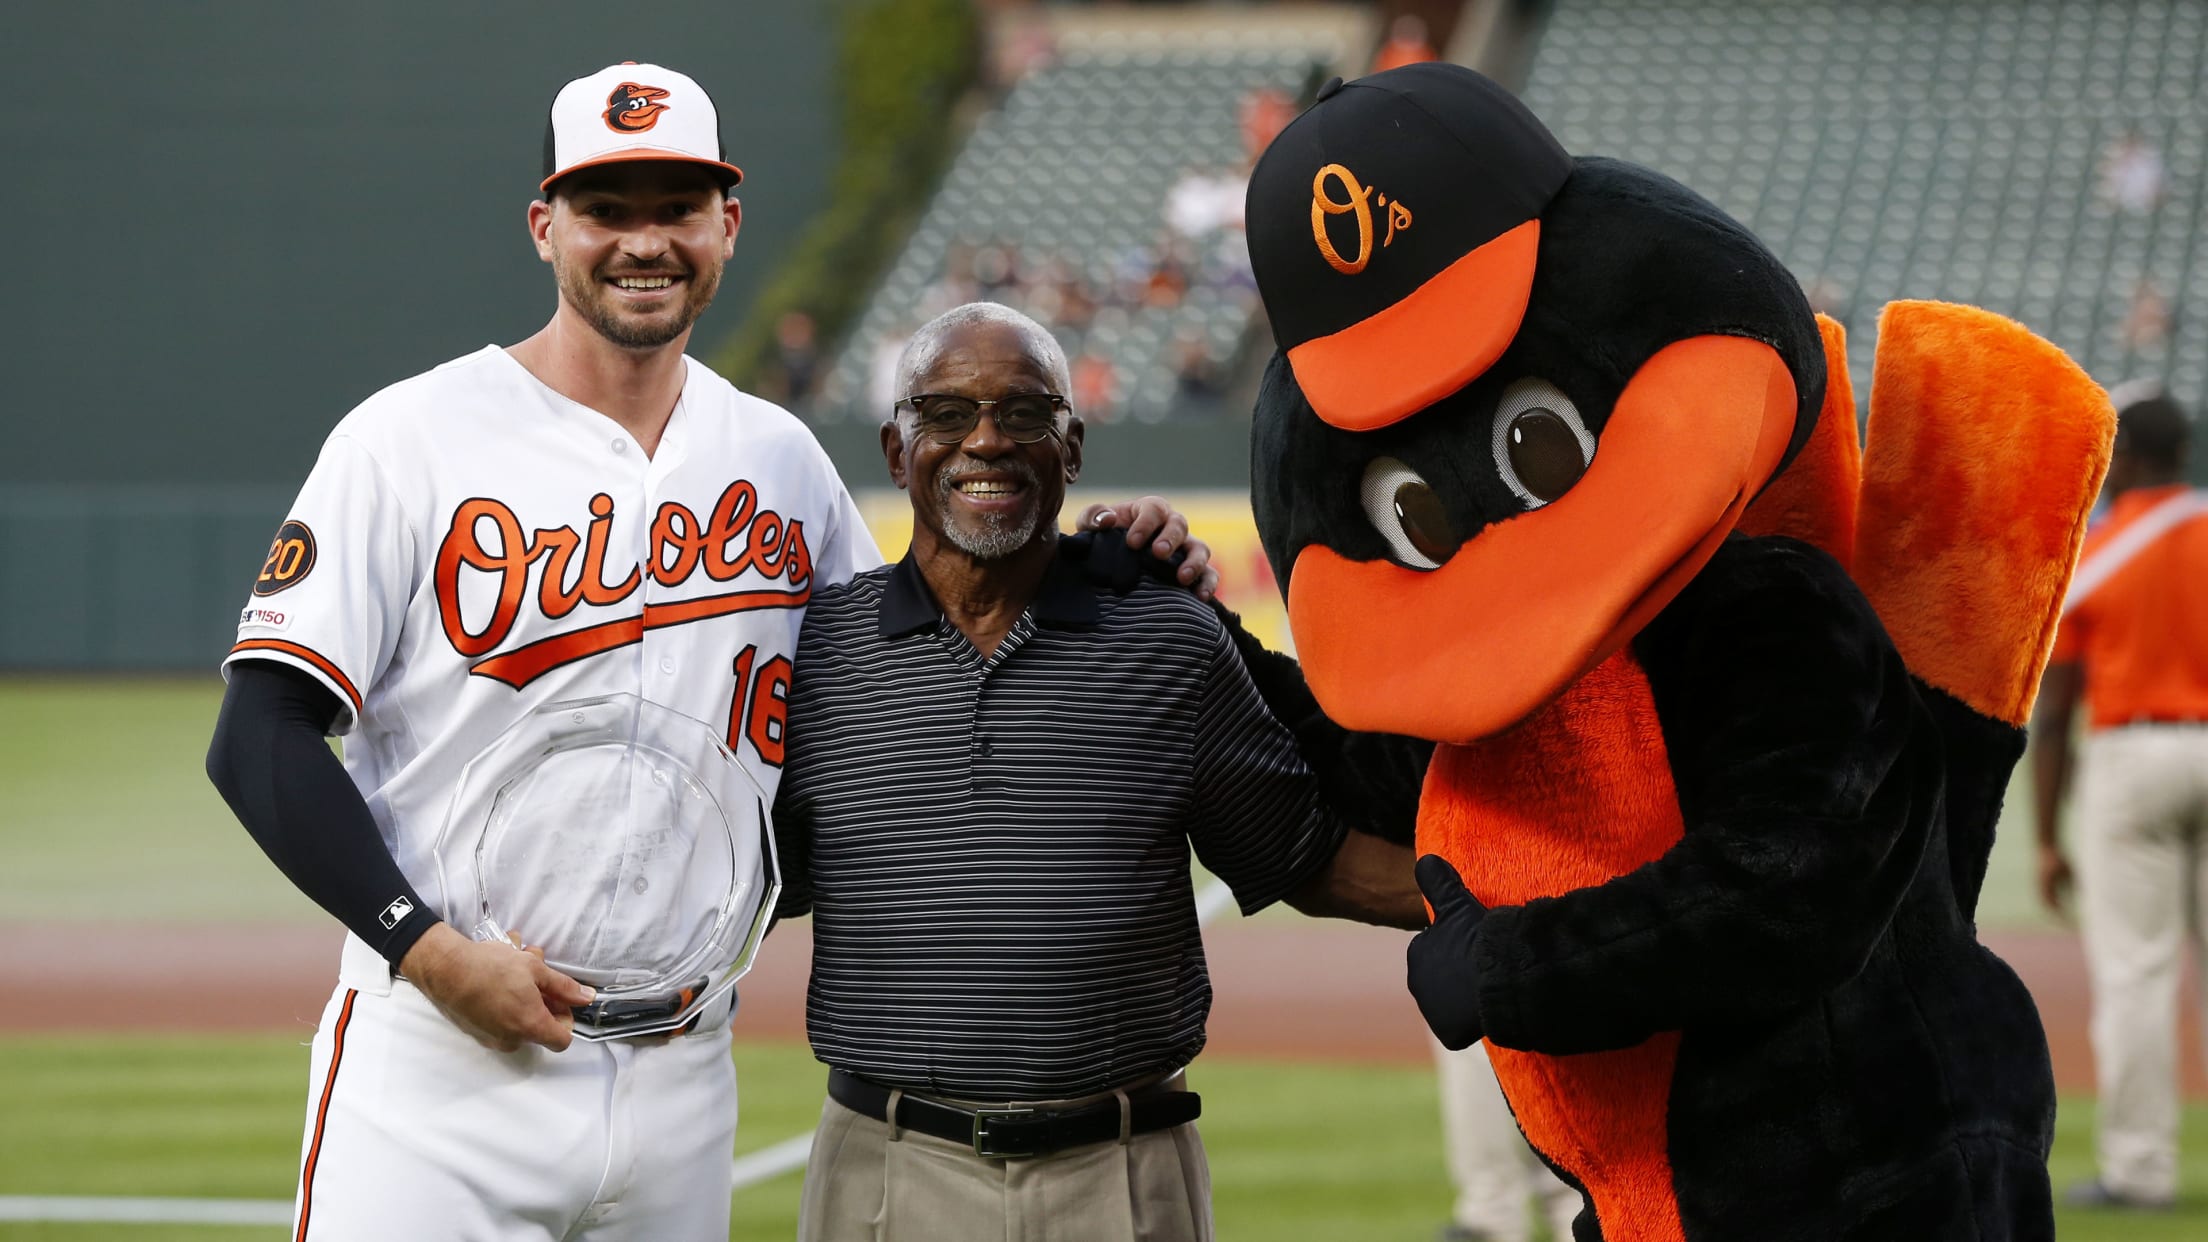 Orioles to Wear MLB's First-Ever Braille Jerseys